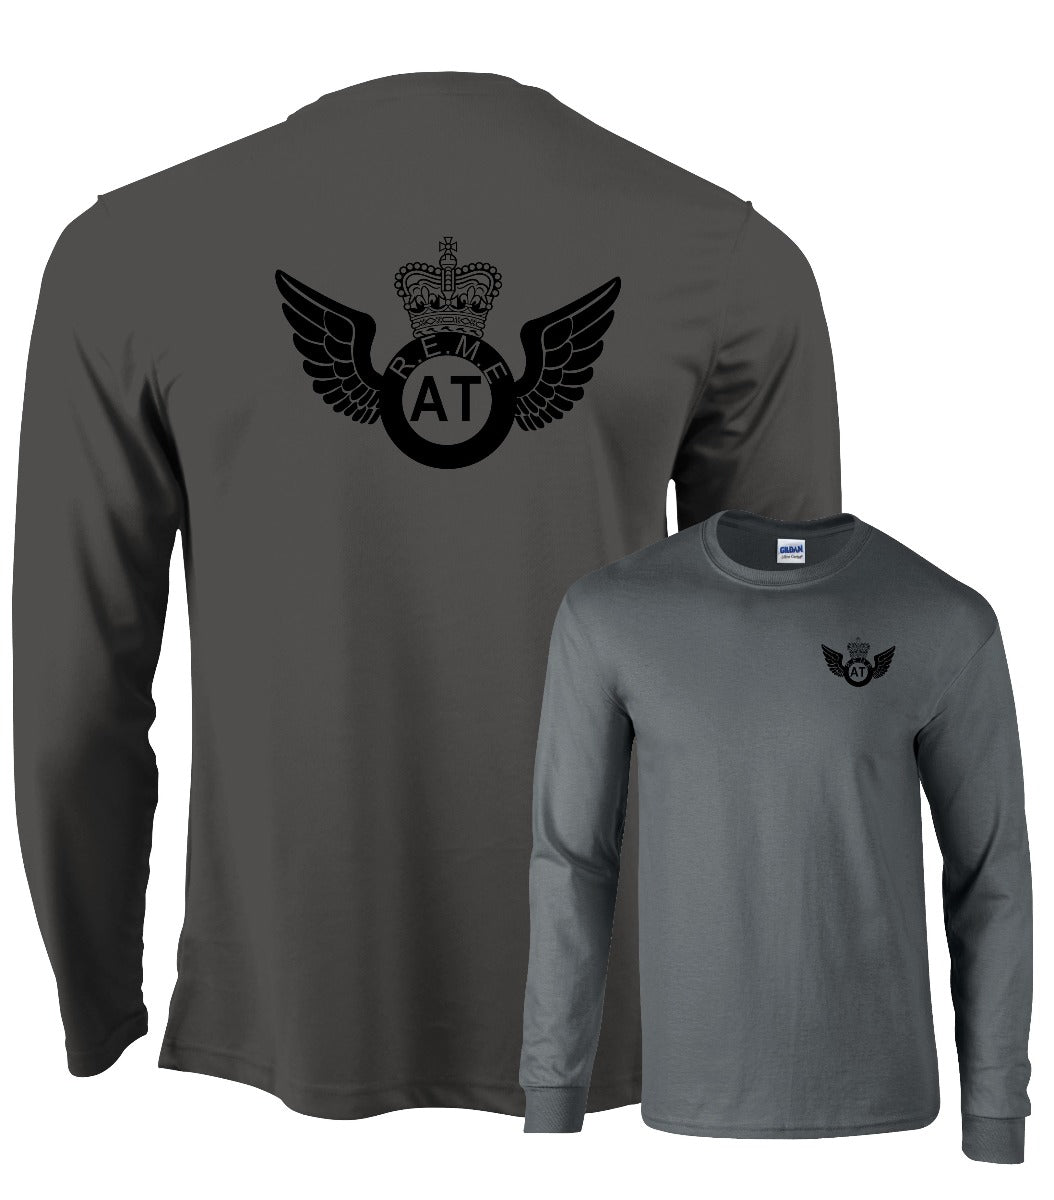 Double Printed AT Wings Long sleeve Wicking T-Shirt